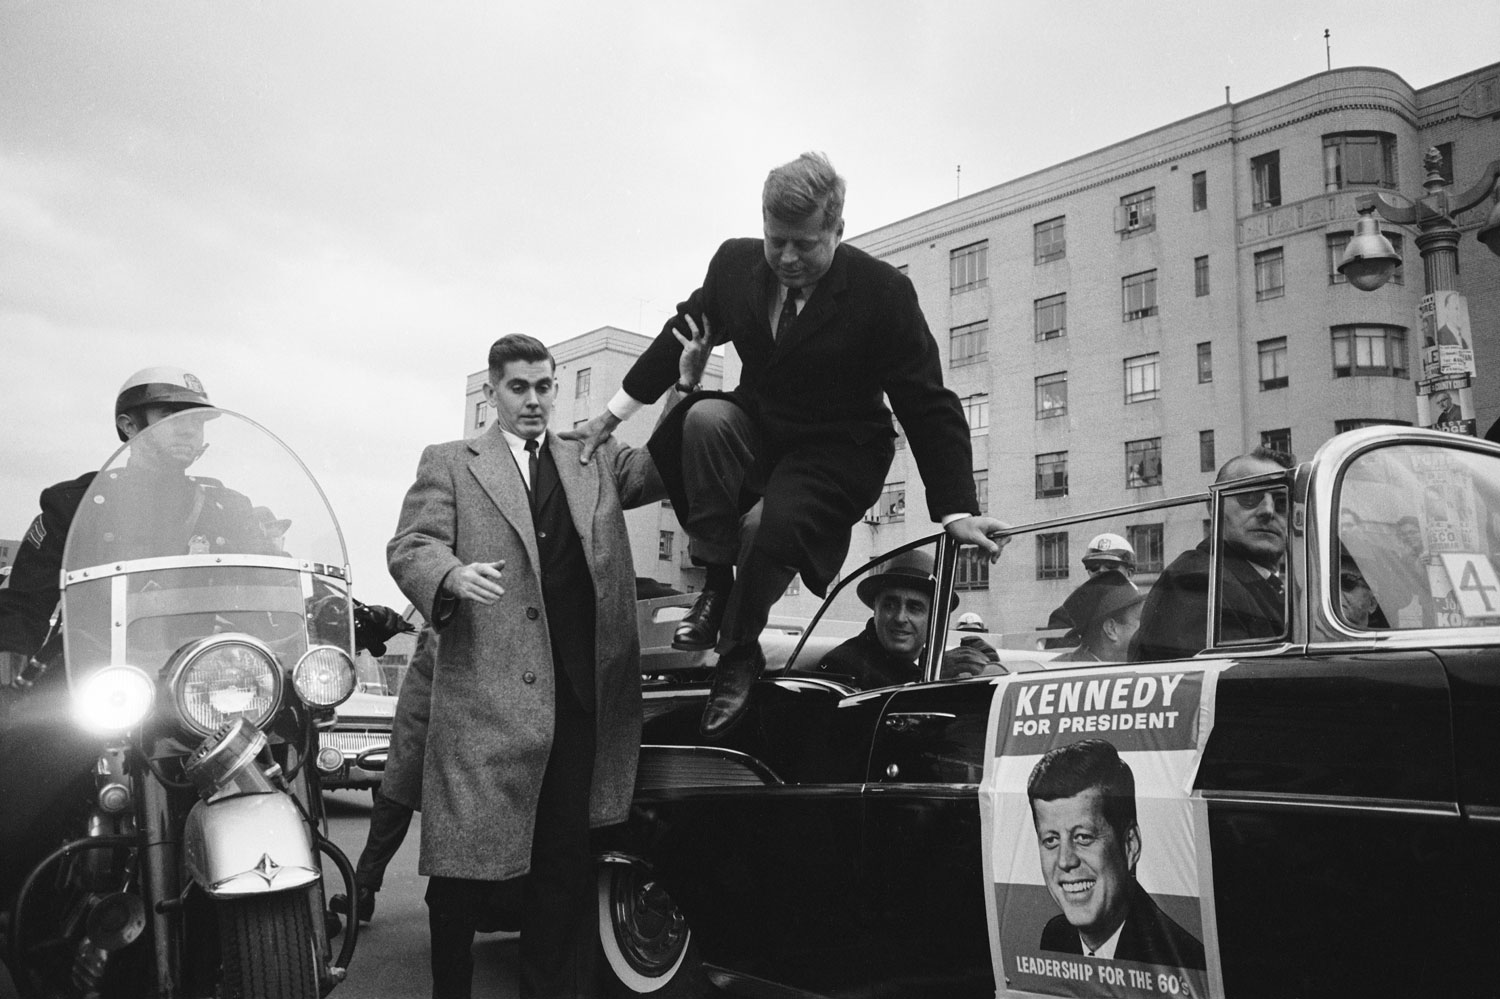 Presidential candidate John F. Kennedy leaps from a car while campaigning, 1960.